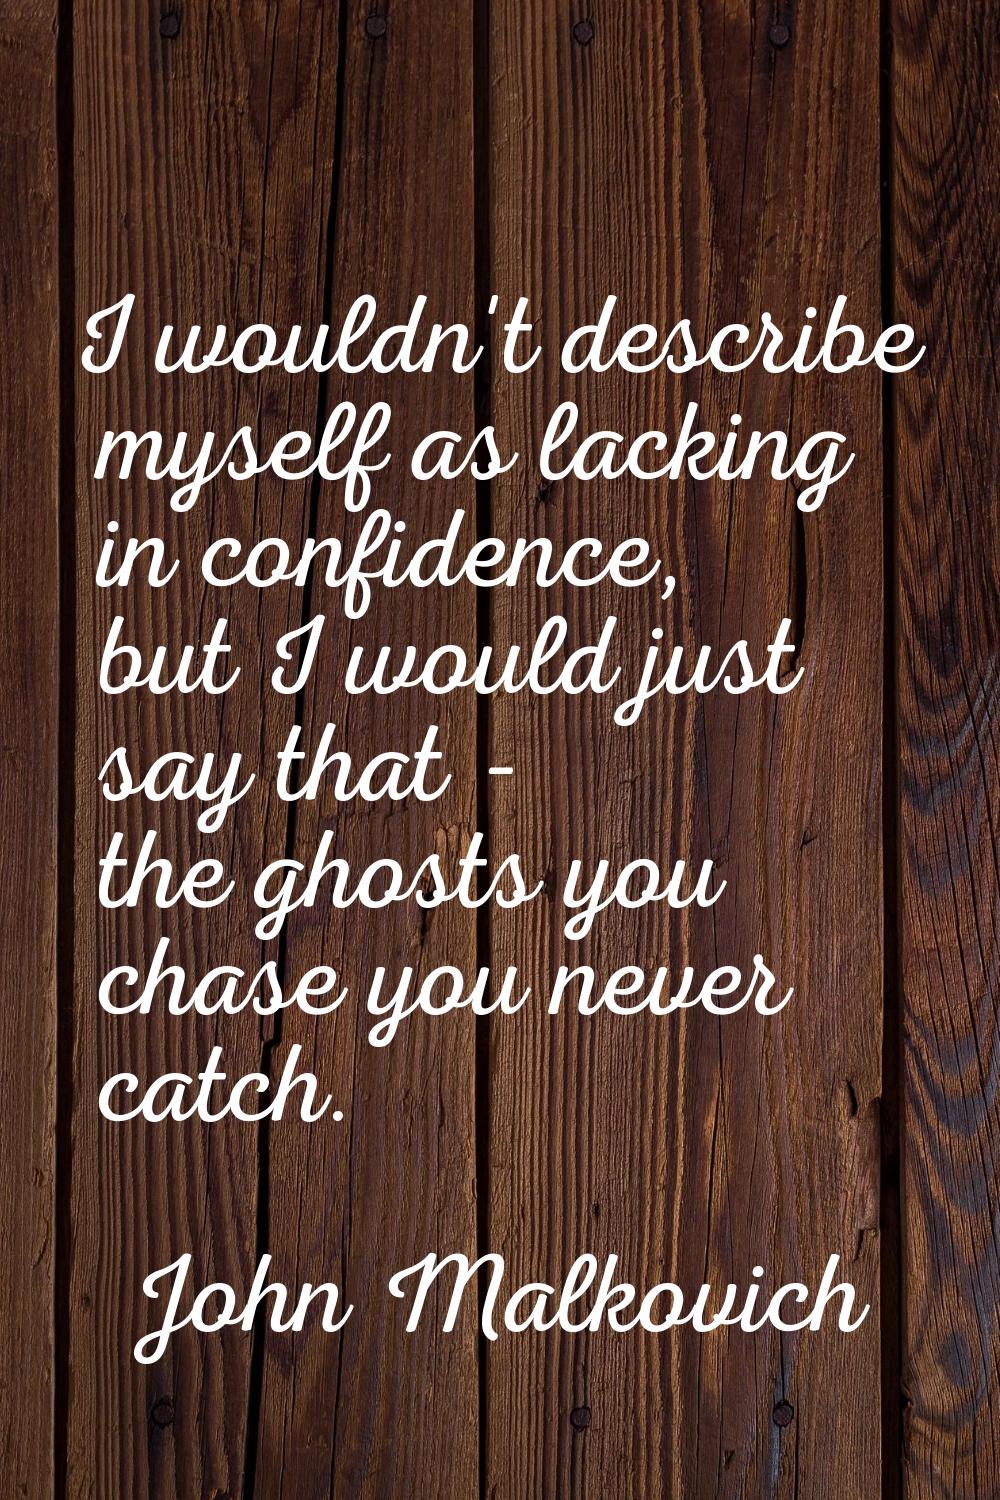 I wouldn't describe myself as lacking in confidence, but I would just say that - the ghosts you cha